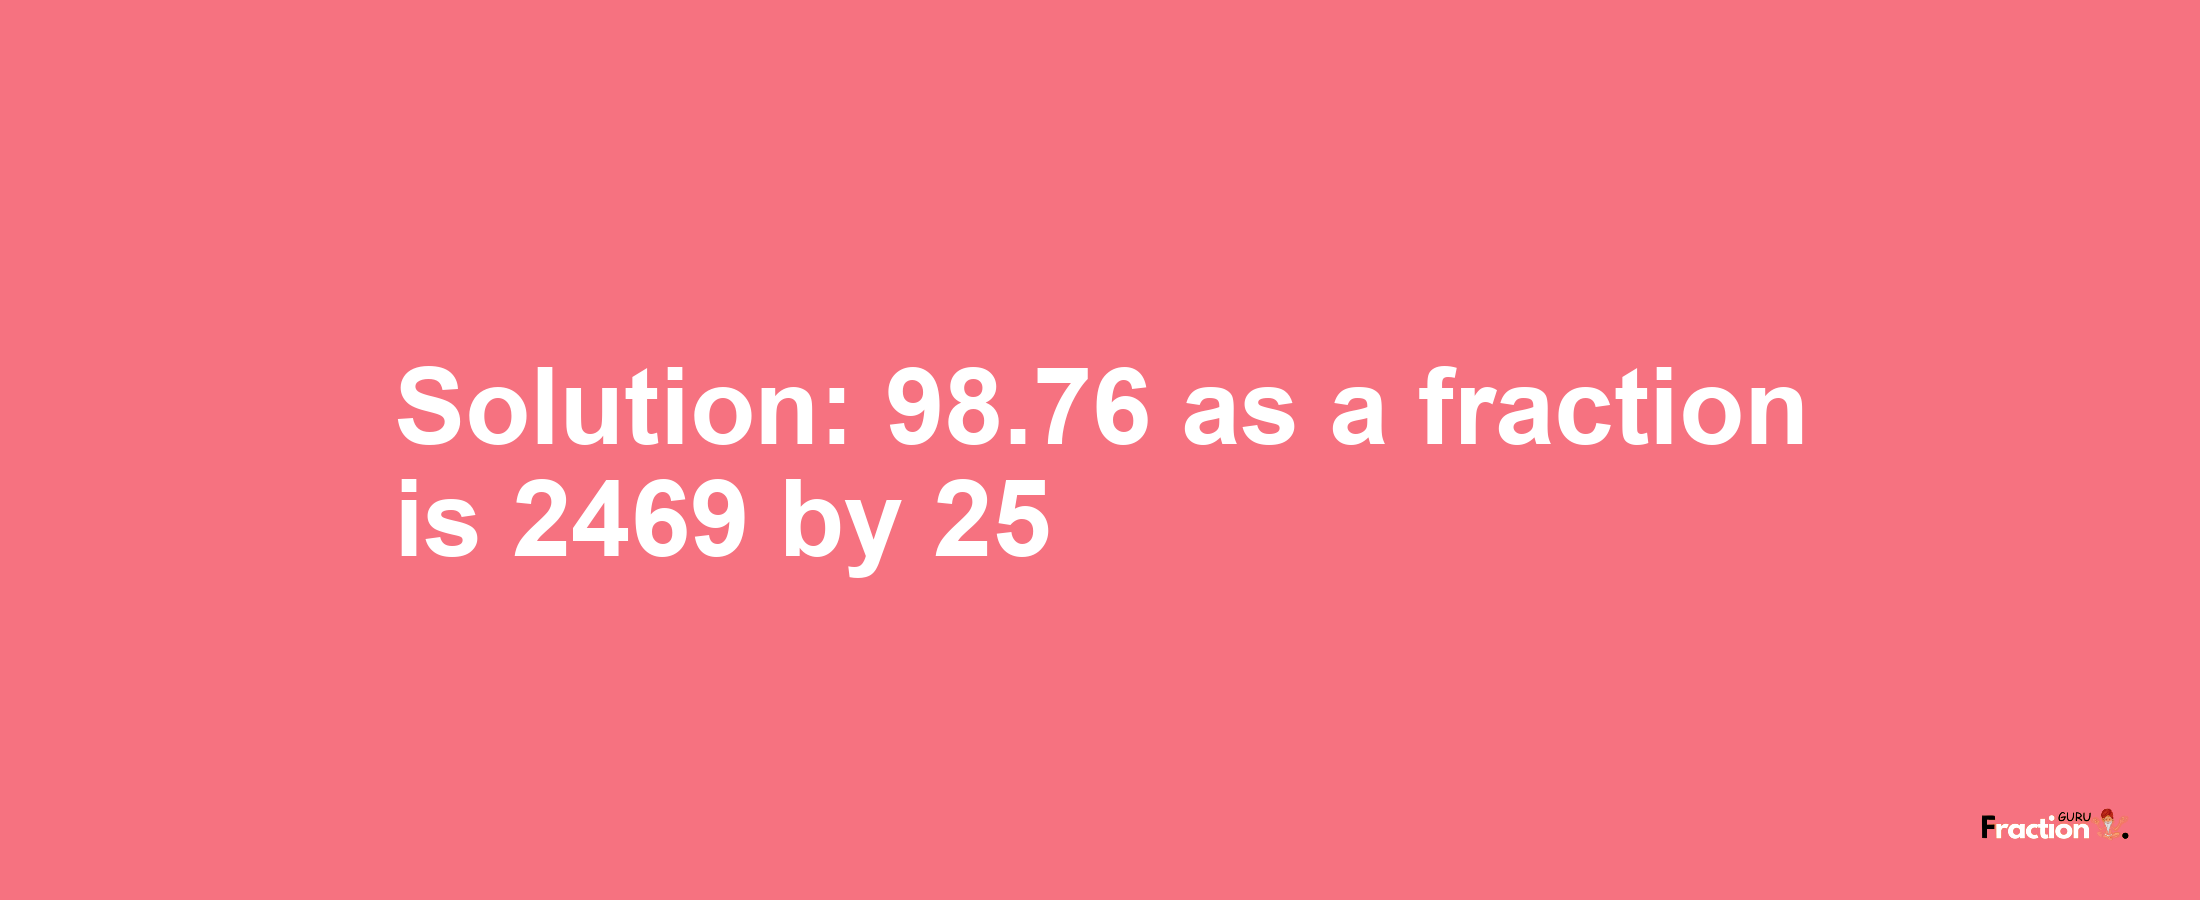 Solution:98.76 as a fraction is 2469/25